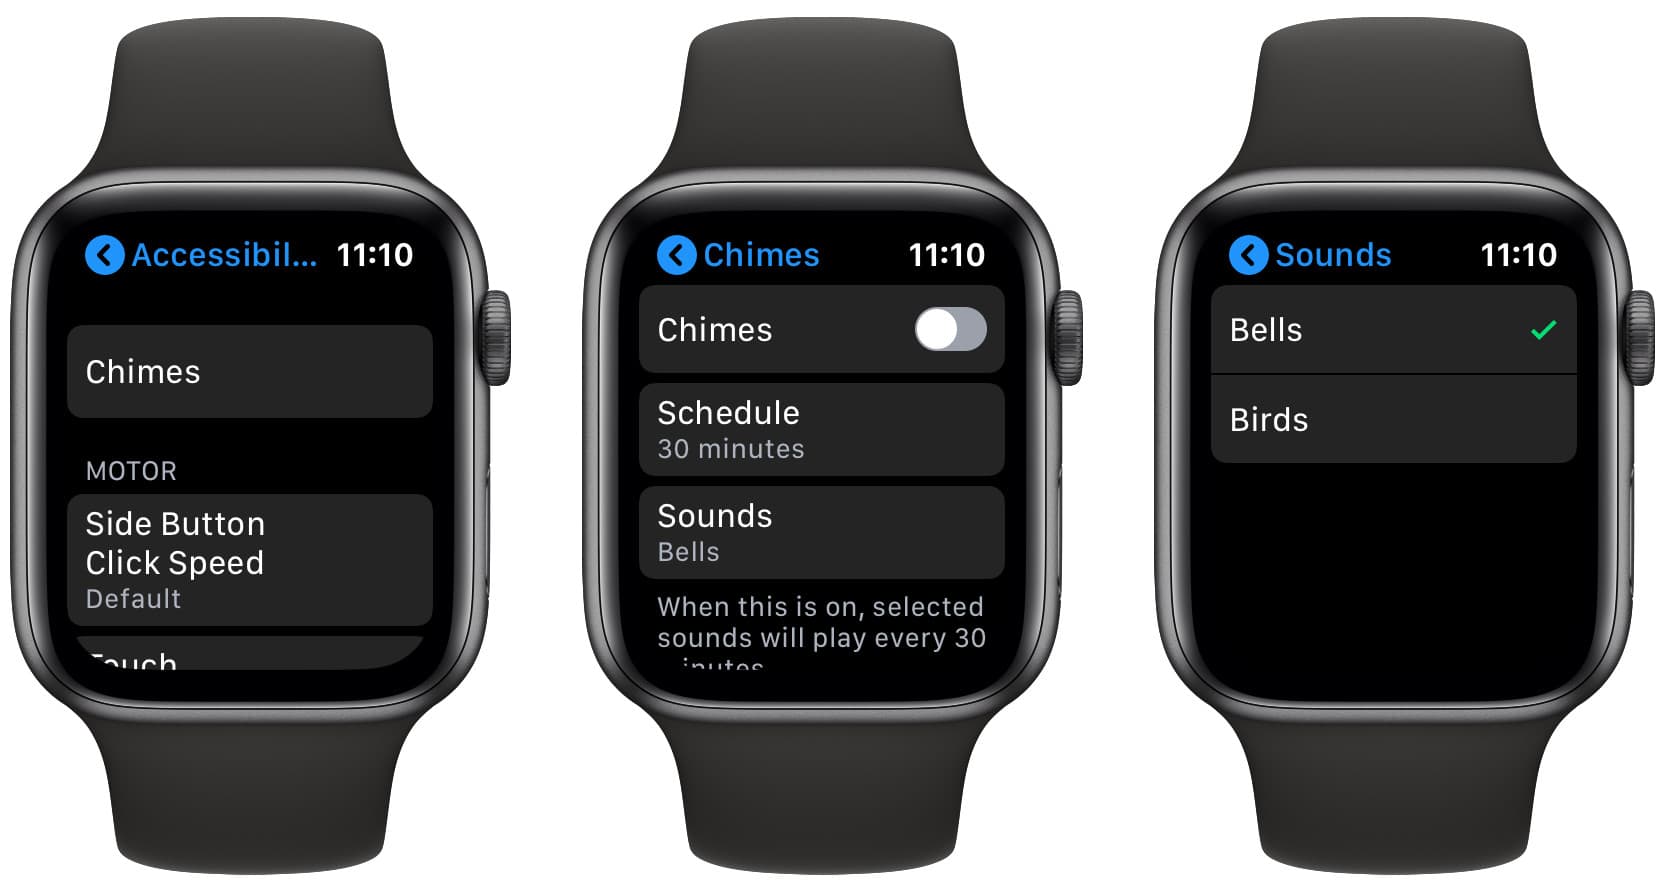 The hourly chime settings on the Apple Watch.